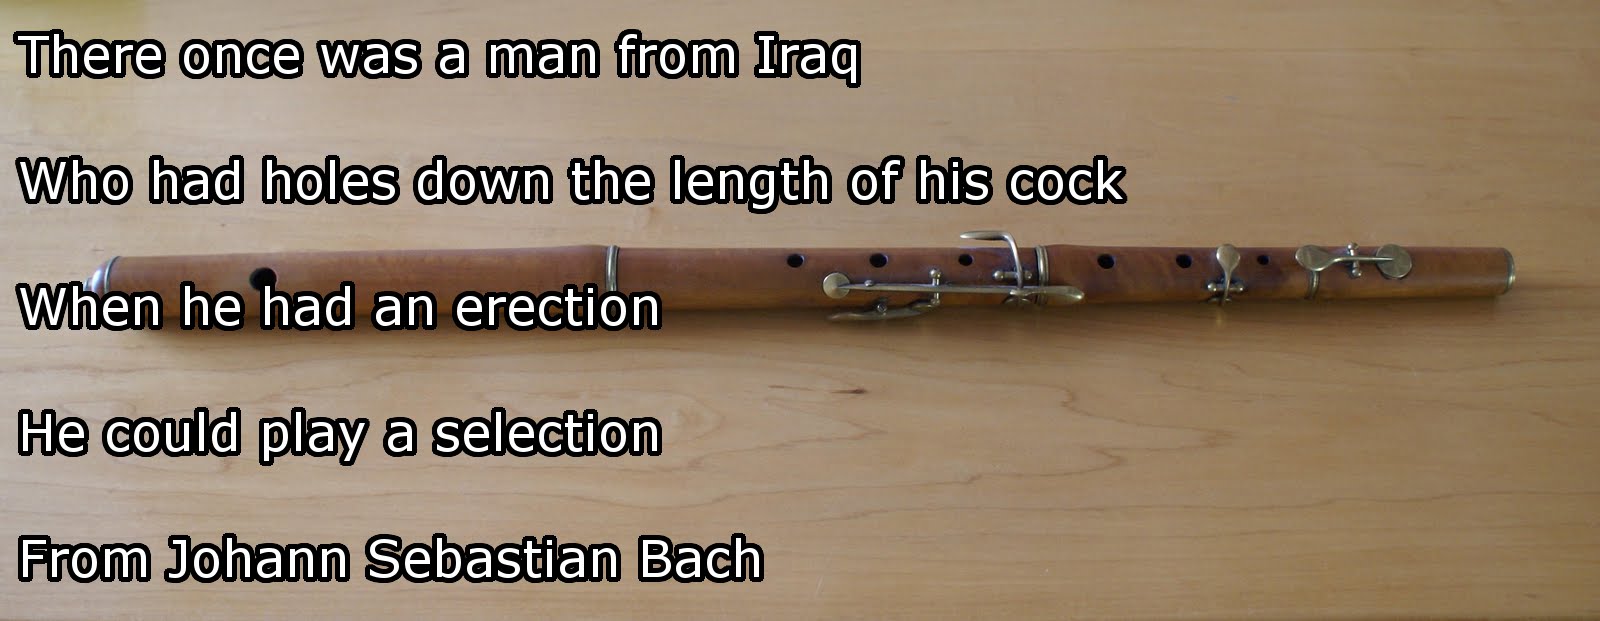 funny limericks dirty - There once was a man from Iraq Who had holes down the length of his cock When he had an erection He could play a selection From Johann Sebastian Bach